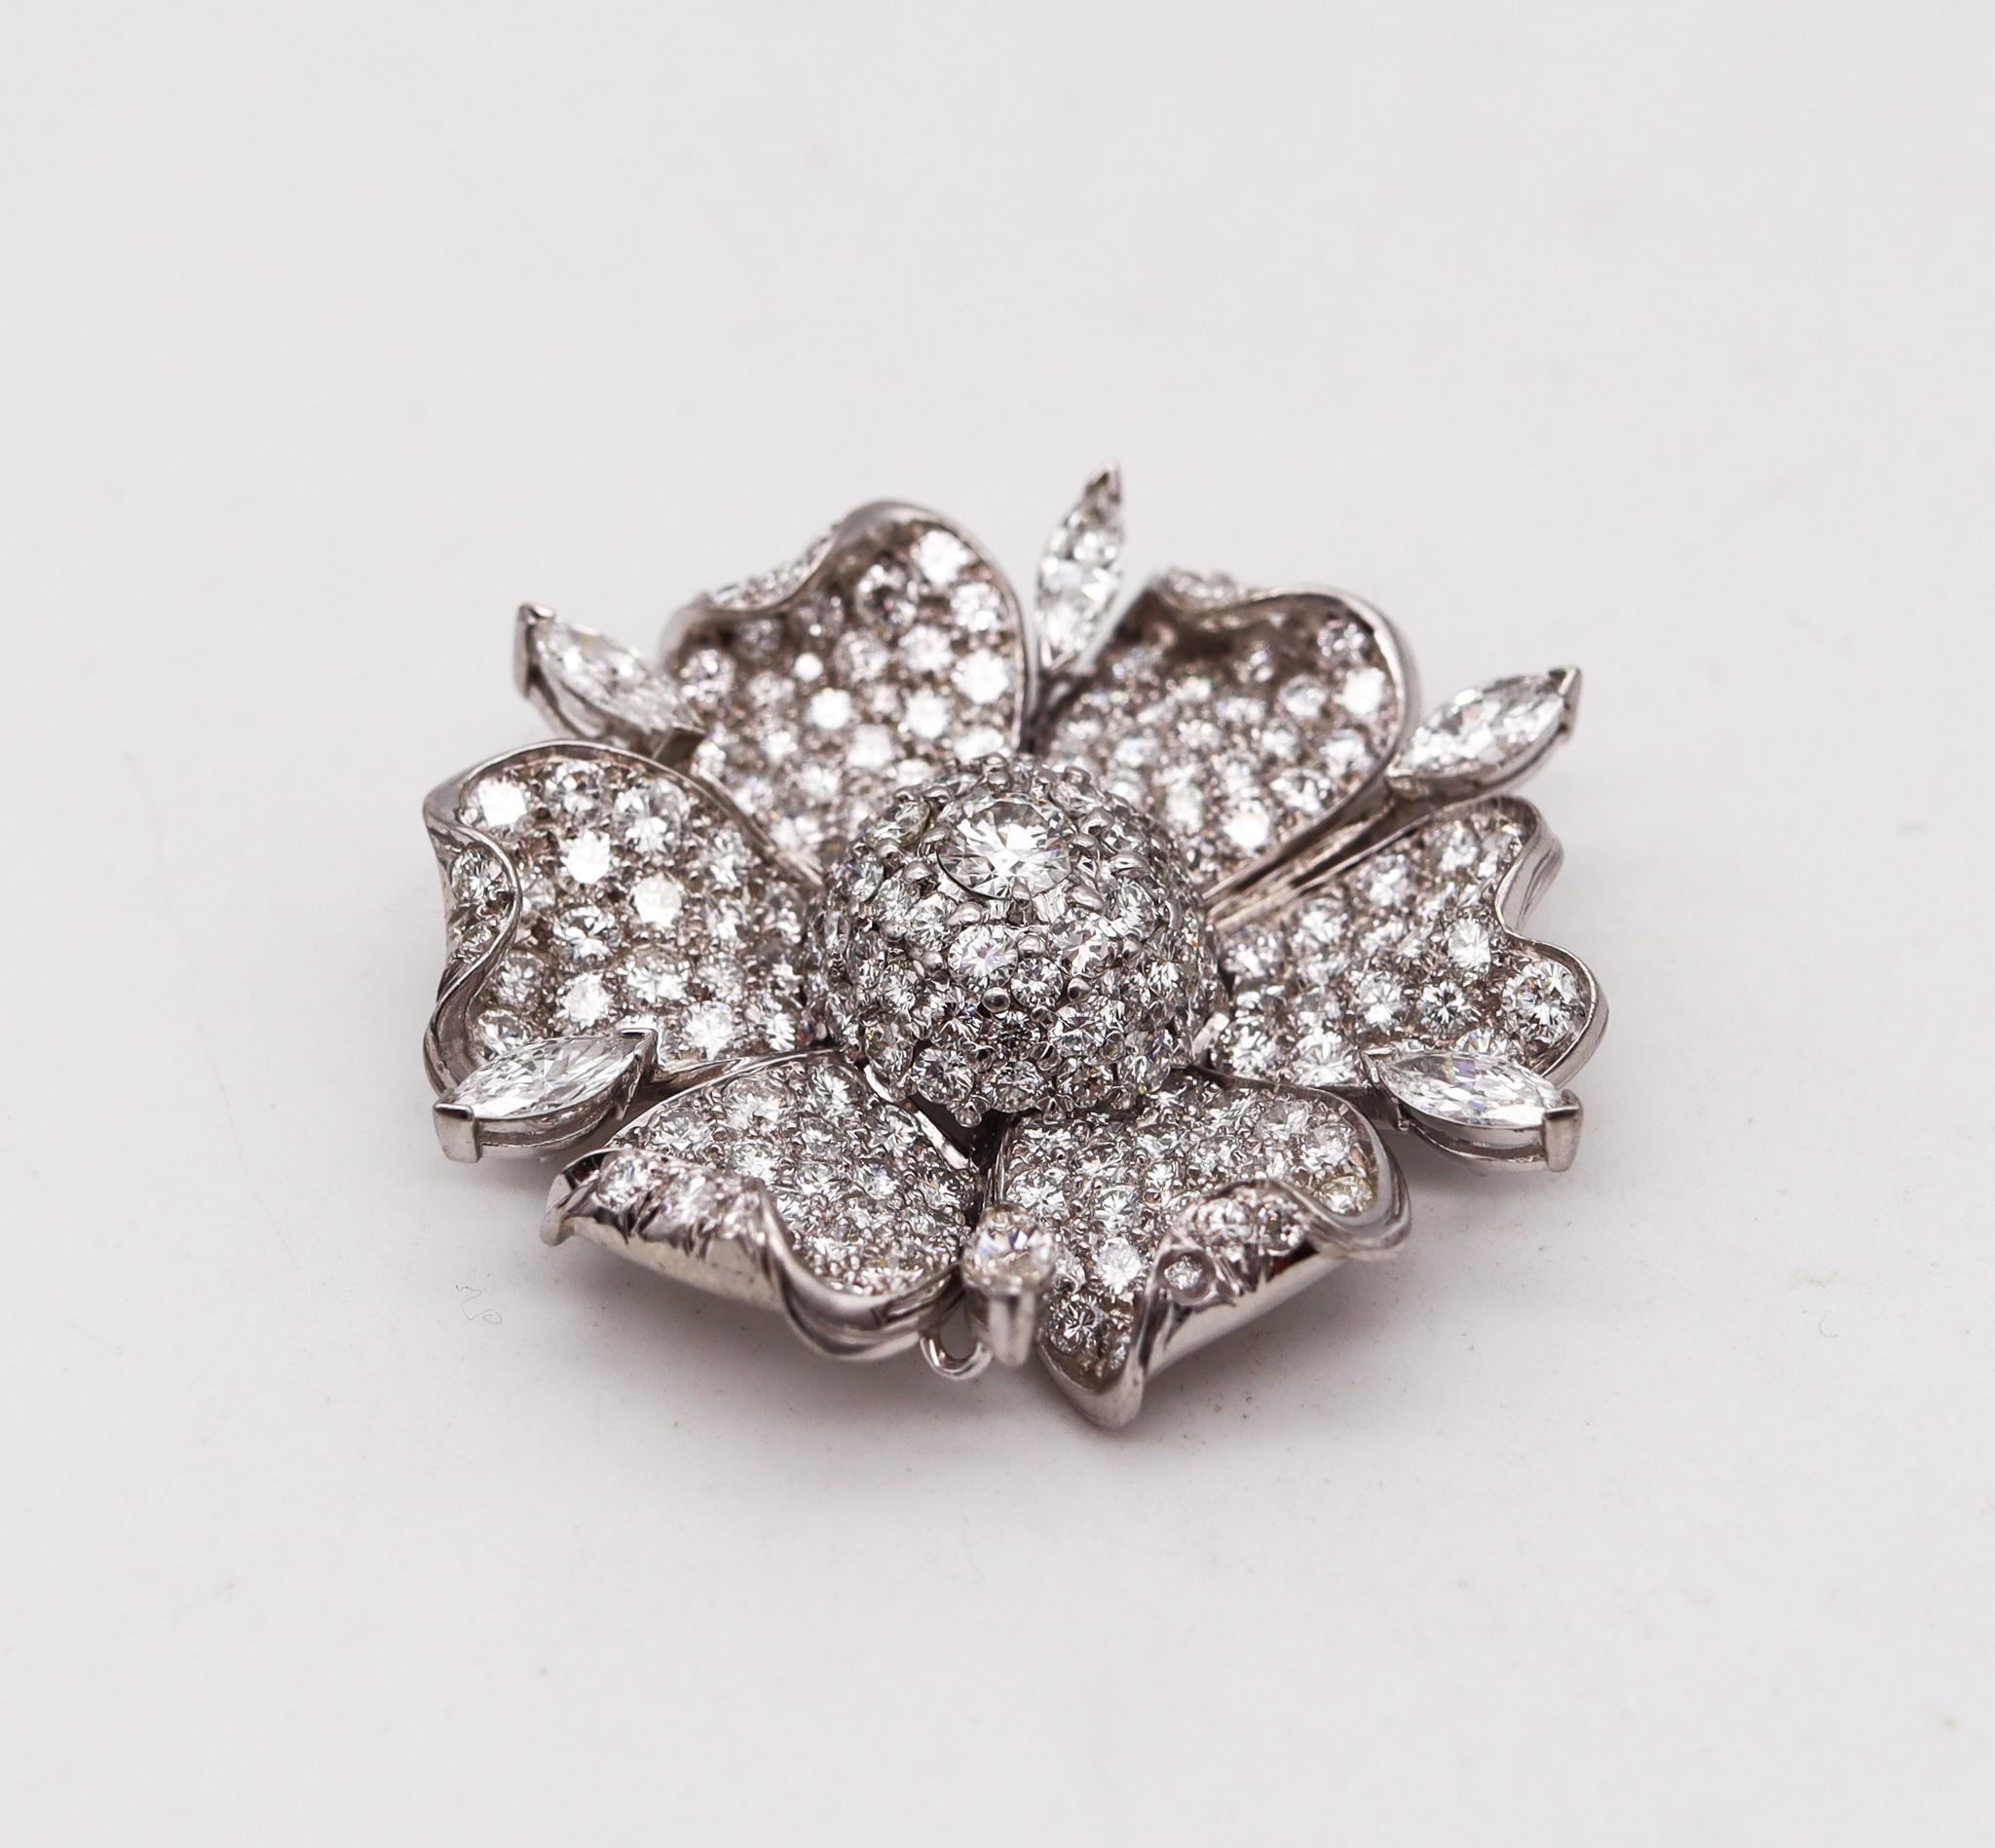 An art-deco gem-set brooch.

Gorgeous piece from the late American art deco period, circa 1930's. This beautiful brooch was carefully assembled from several elements crafted in the shape of a flower with stepped petals, in solid .900/.999 platinum